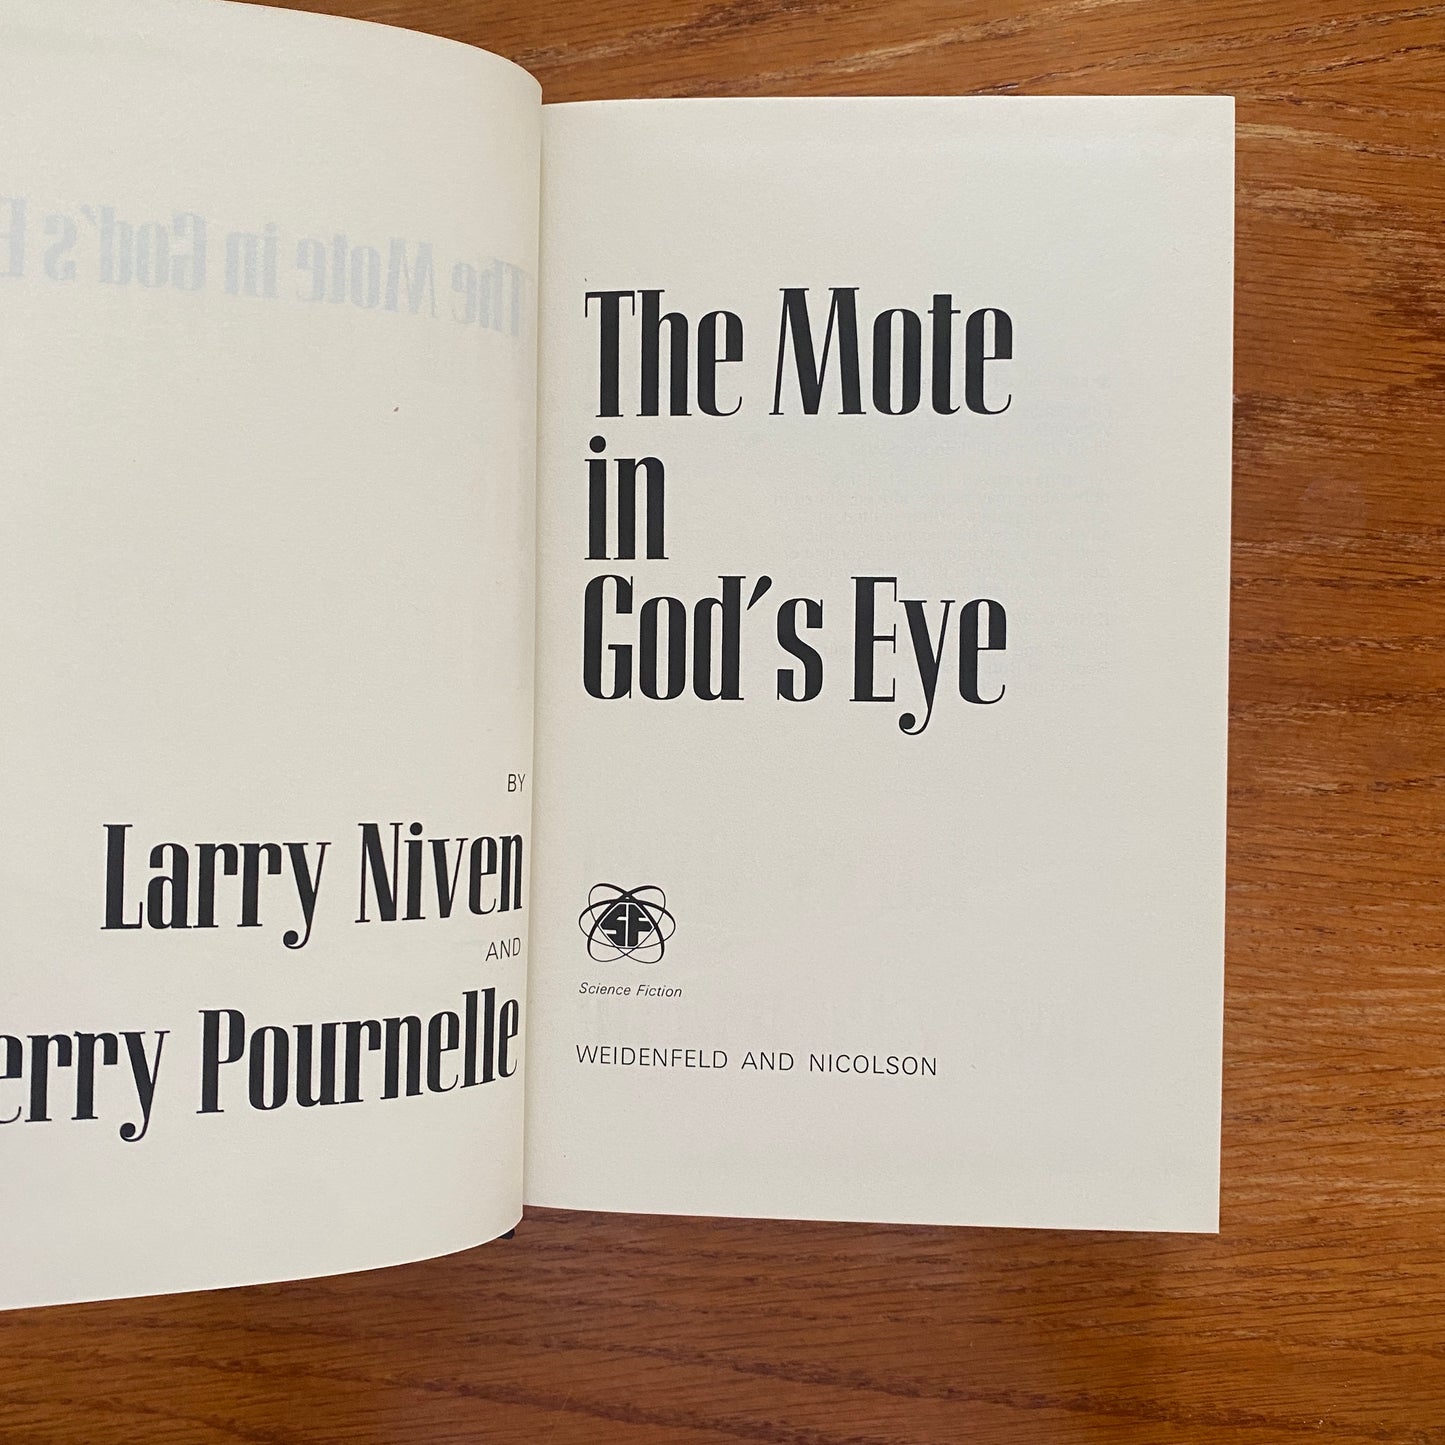 The Mote In God's Eye - Jerry Pournelle & Larry Niven